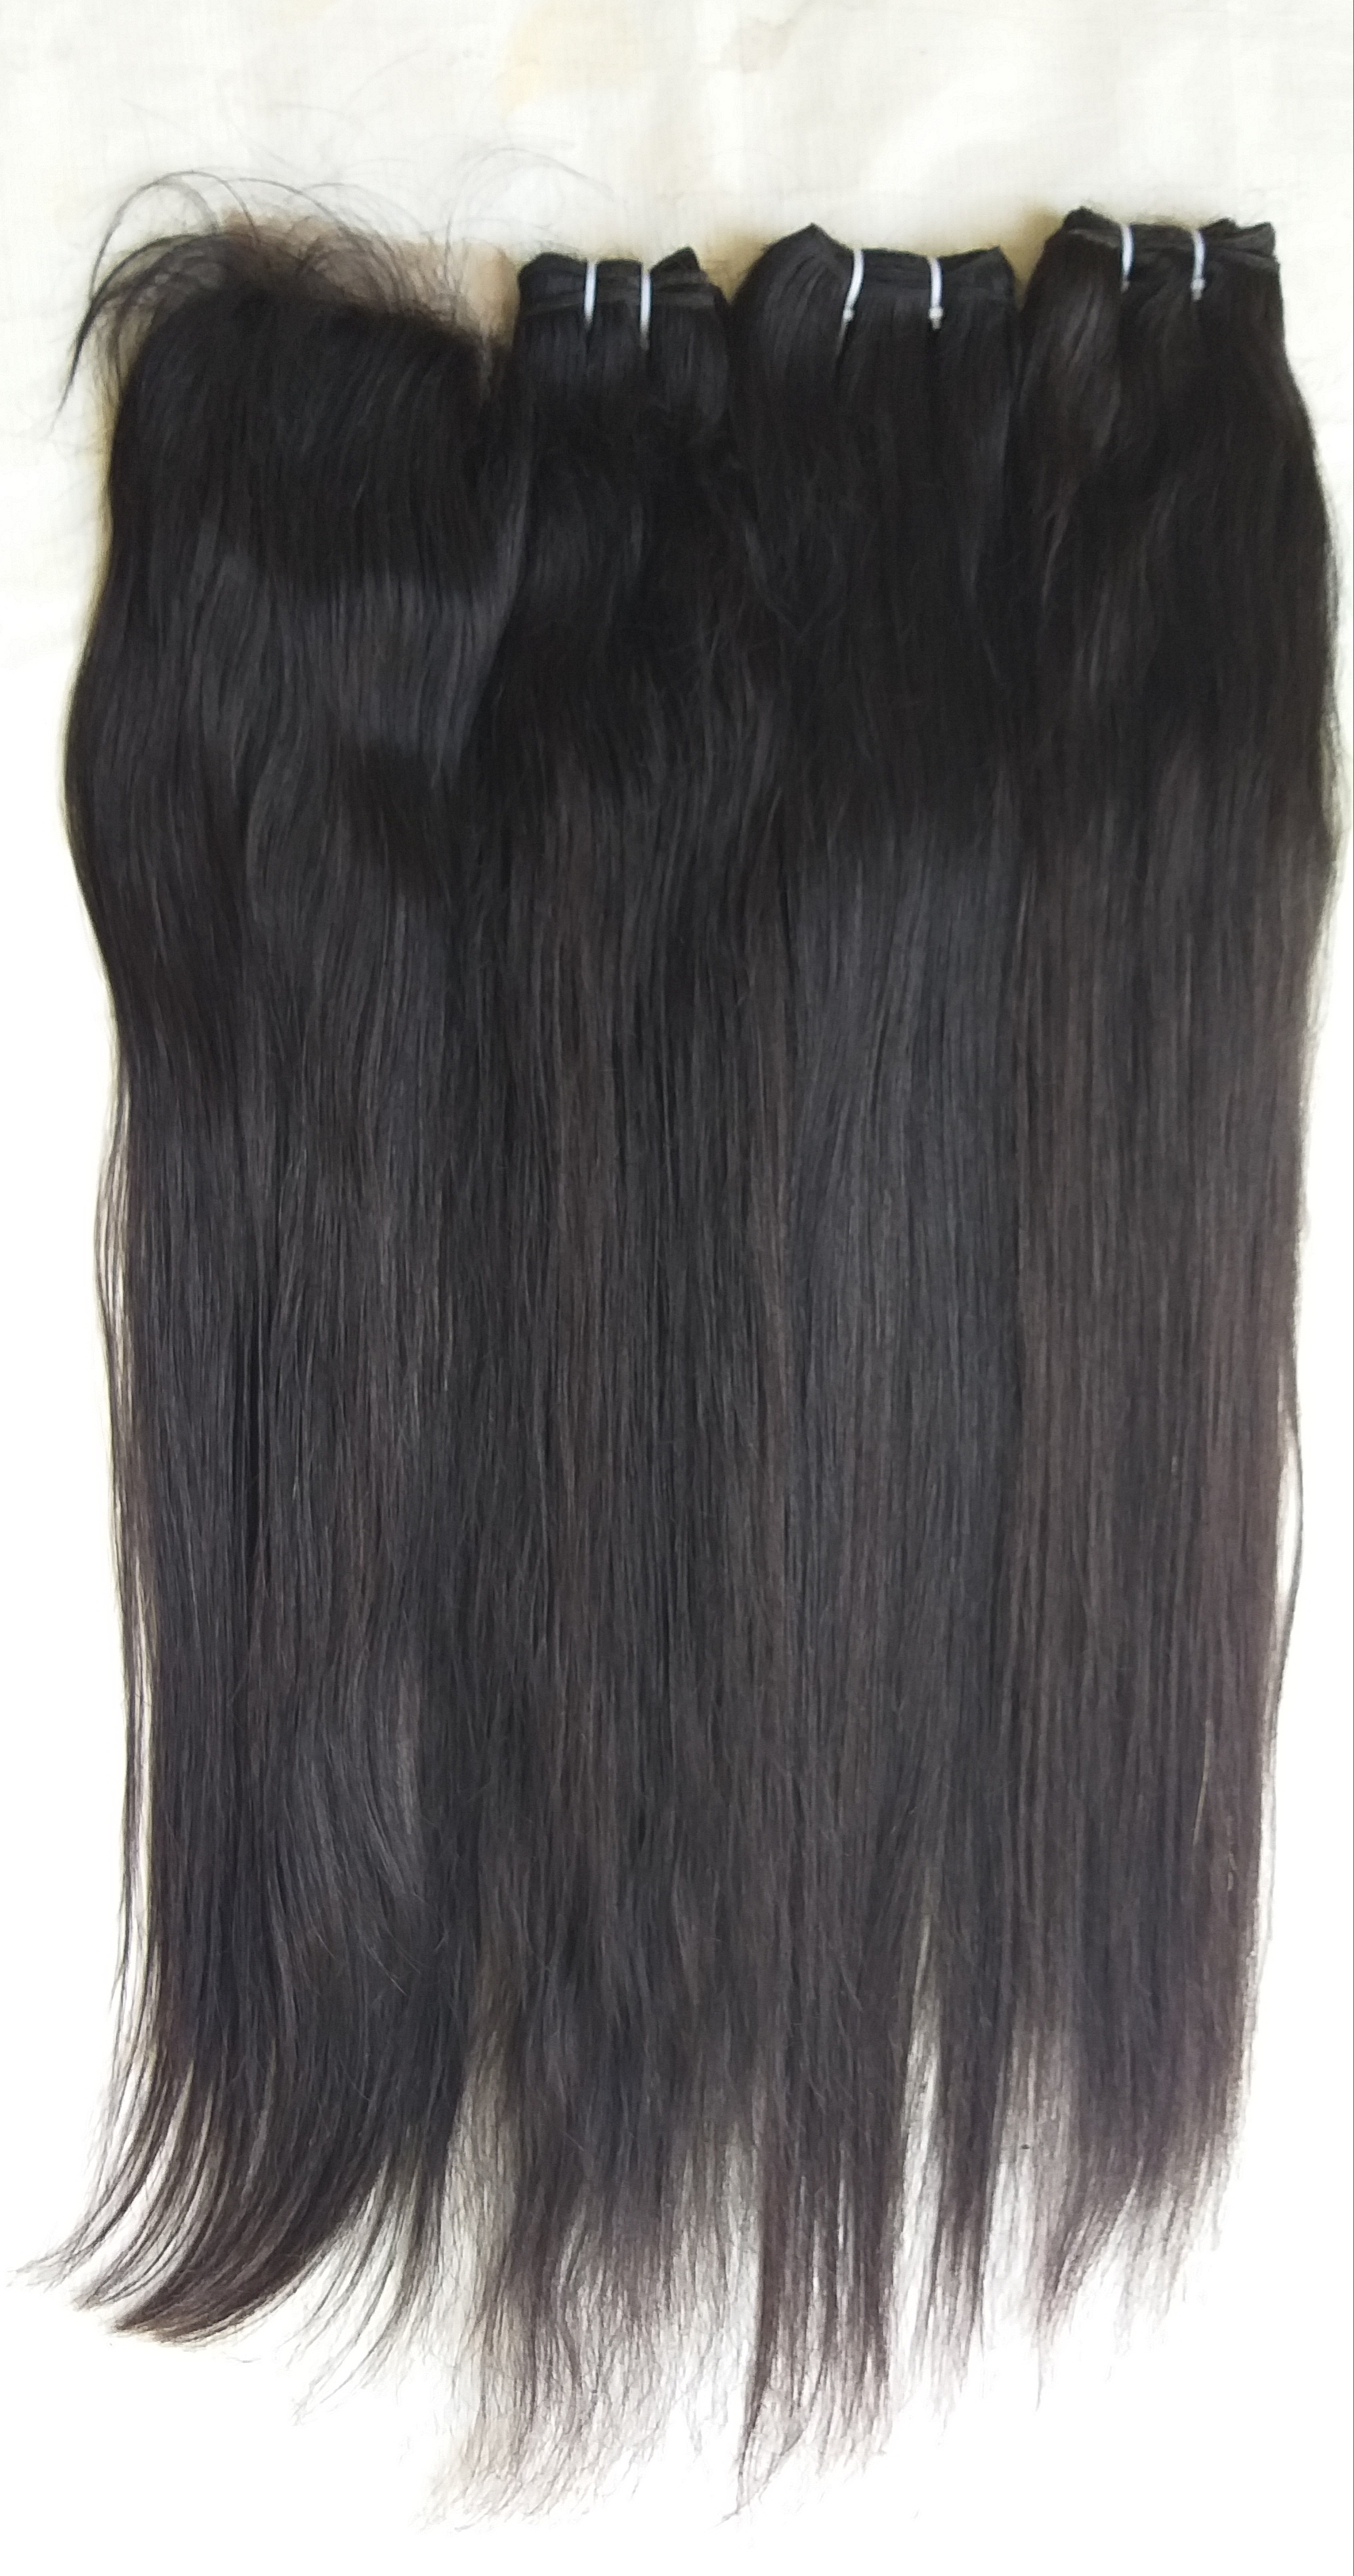 Raw Extension Straight Hair